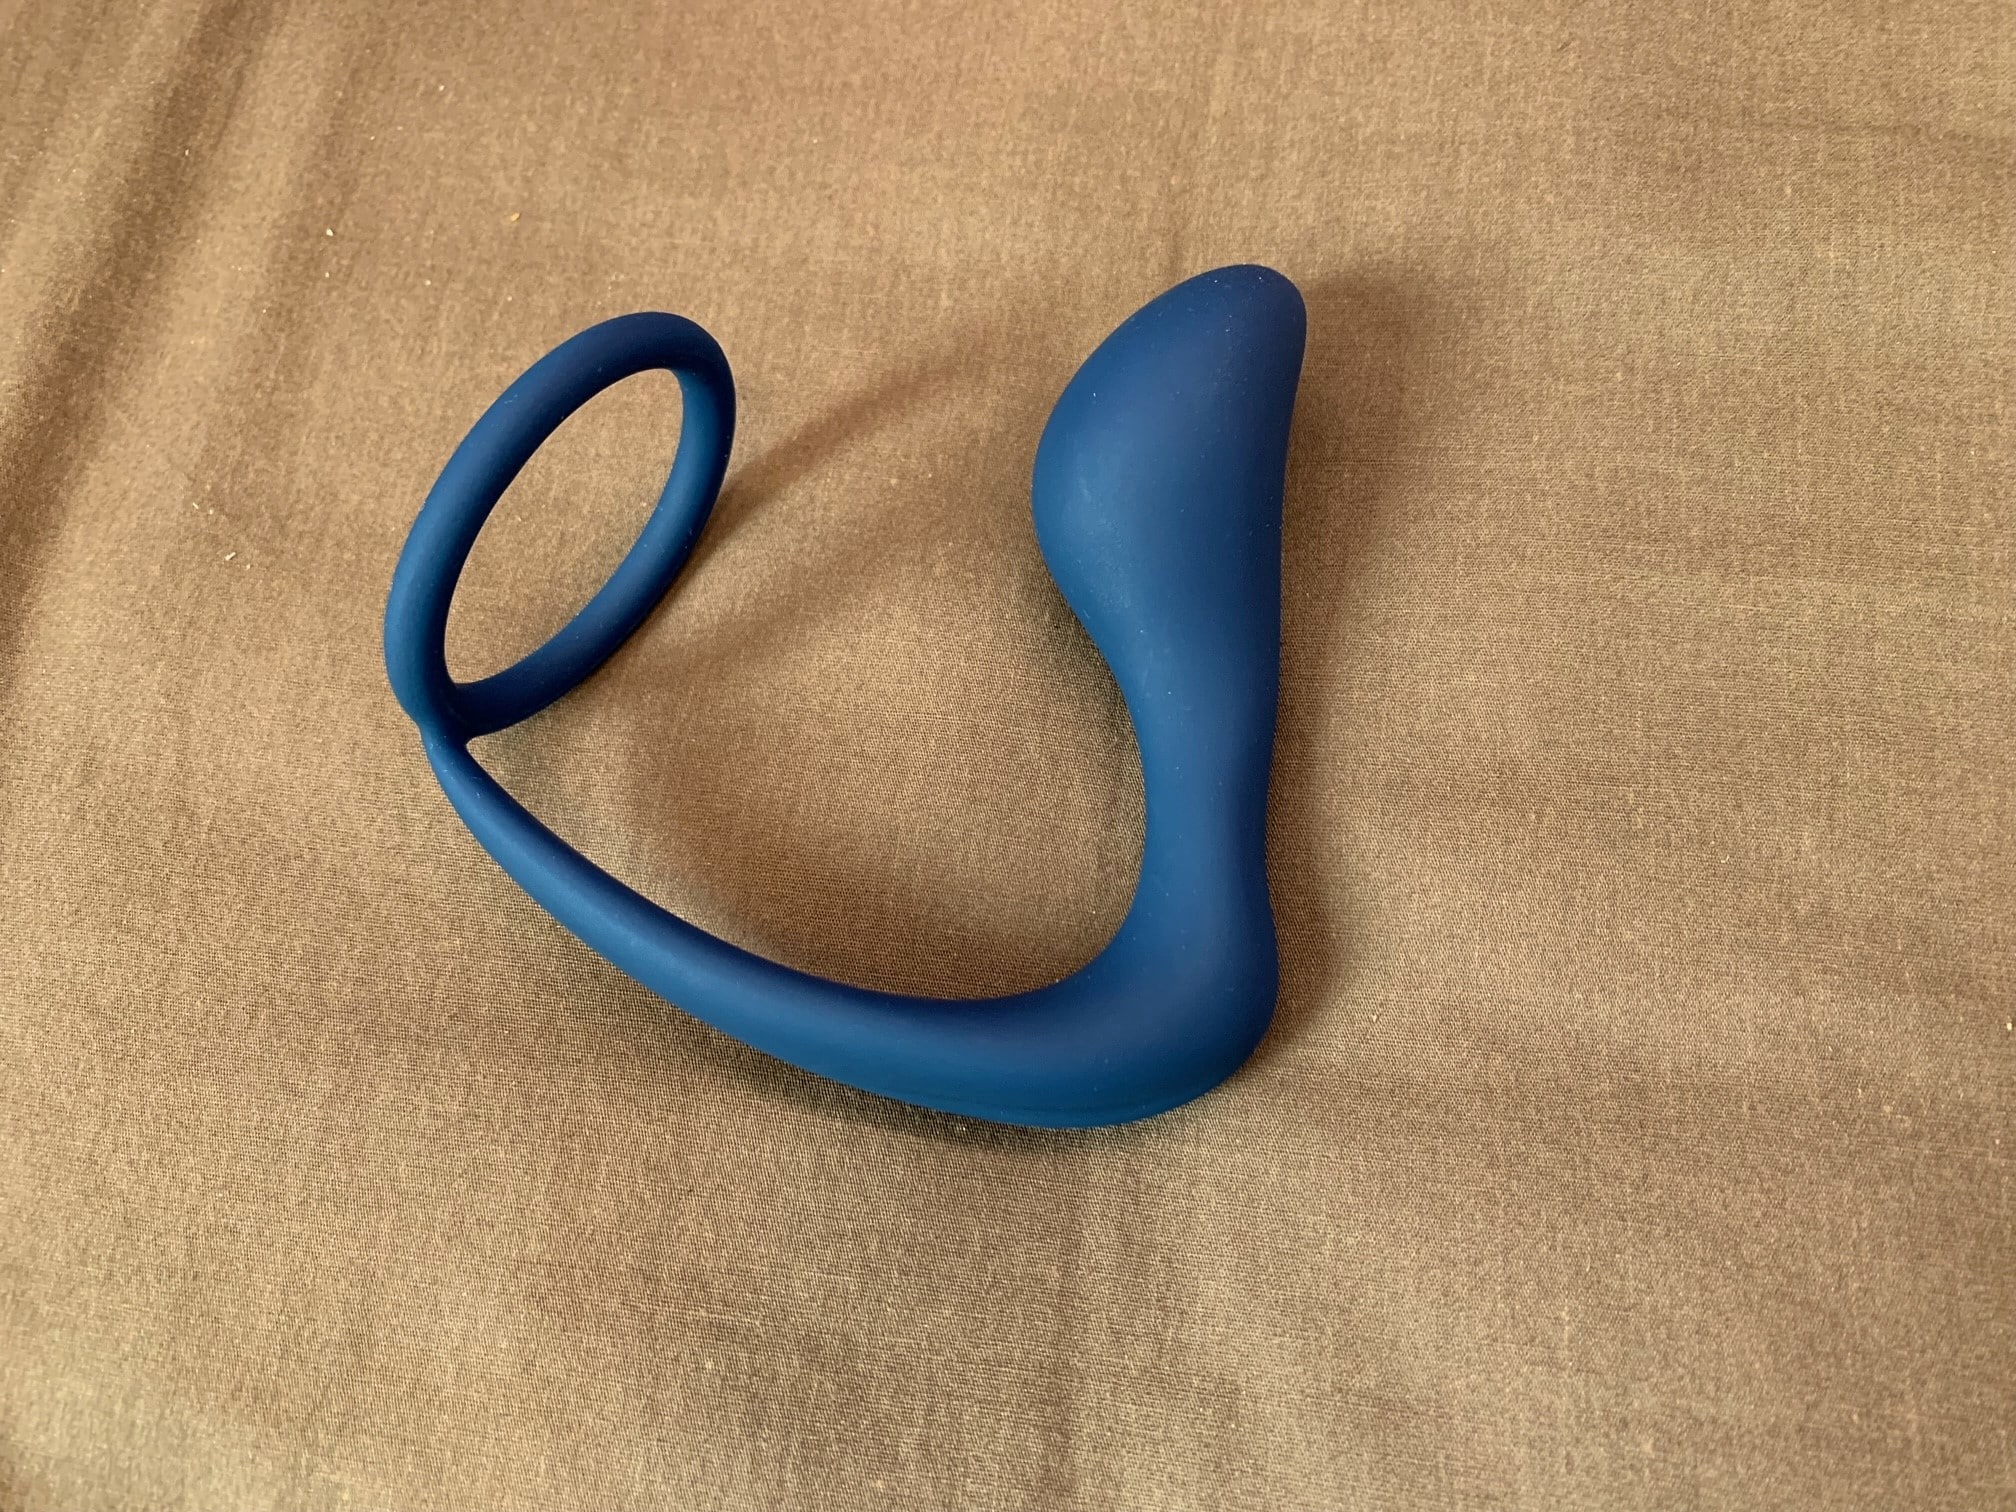 Lynk Plugged Cock Ring Prostate Massager The Lynk Plugged Cock Ring Prostate Massager: ease of use